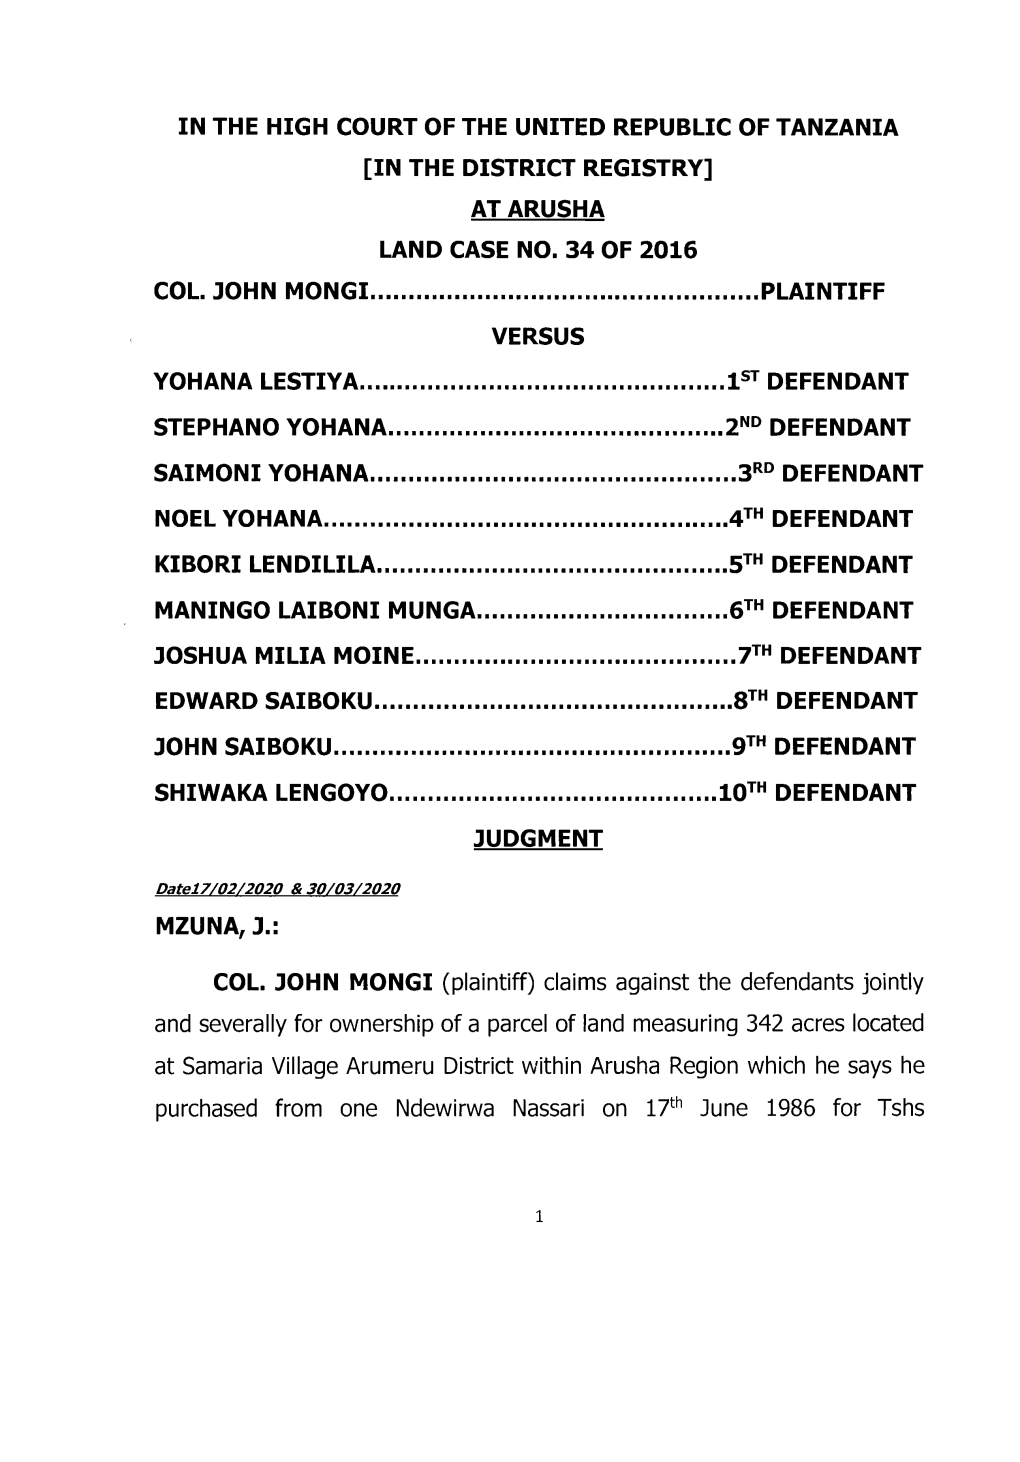 In the High Court of the United Republic of Tanzania [In the District Registry] at Arusha Land Case No